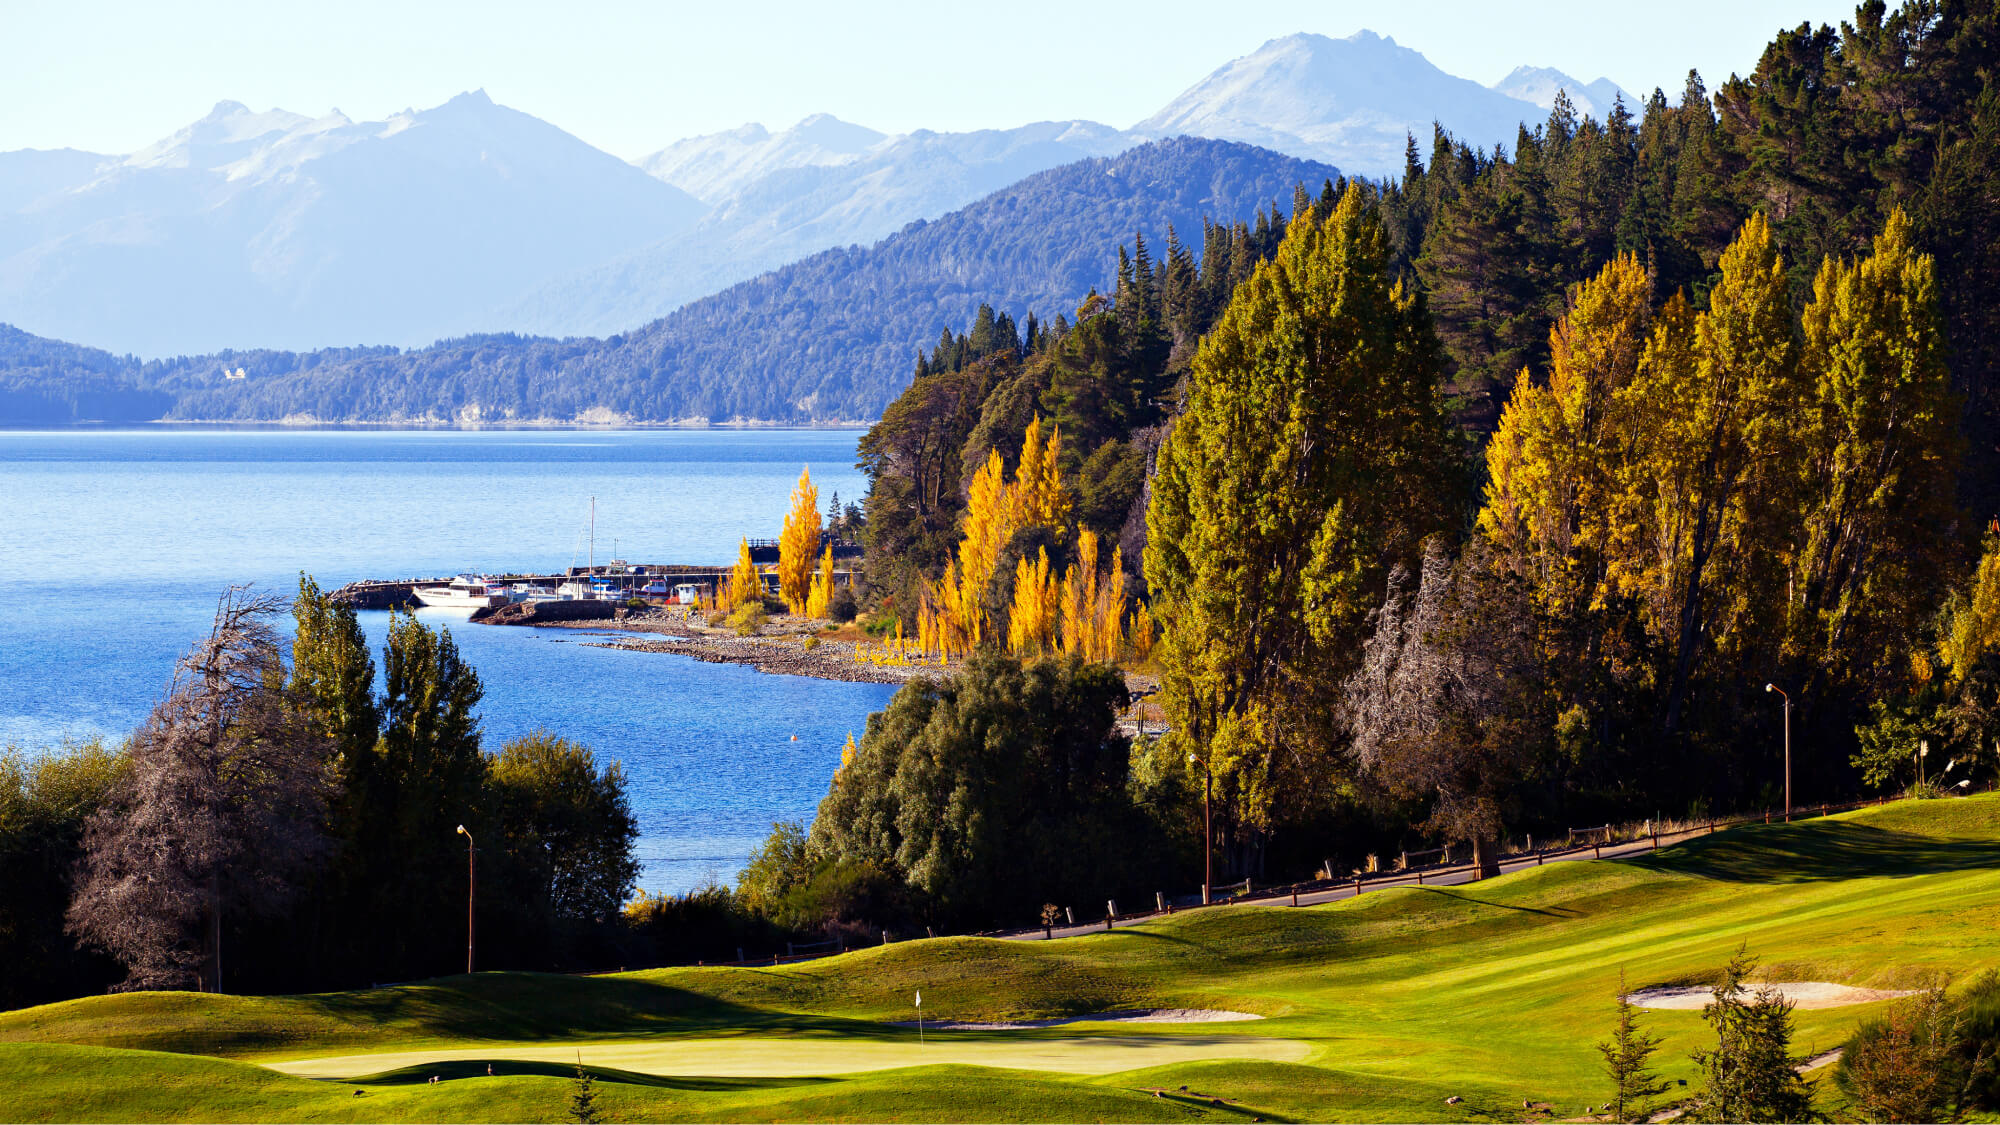 Bariloche Plan Your Unforgettable Trip to Patagonia